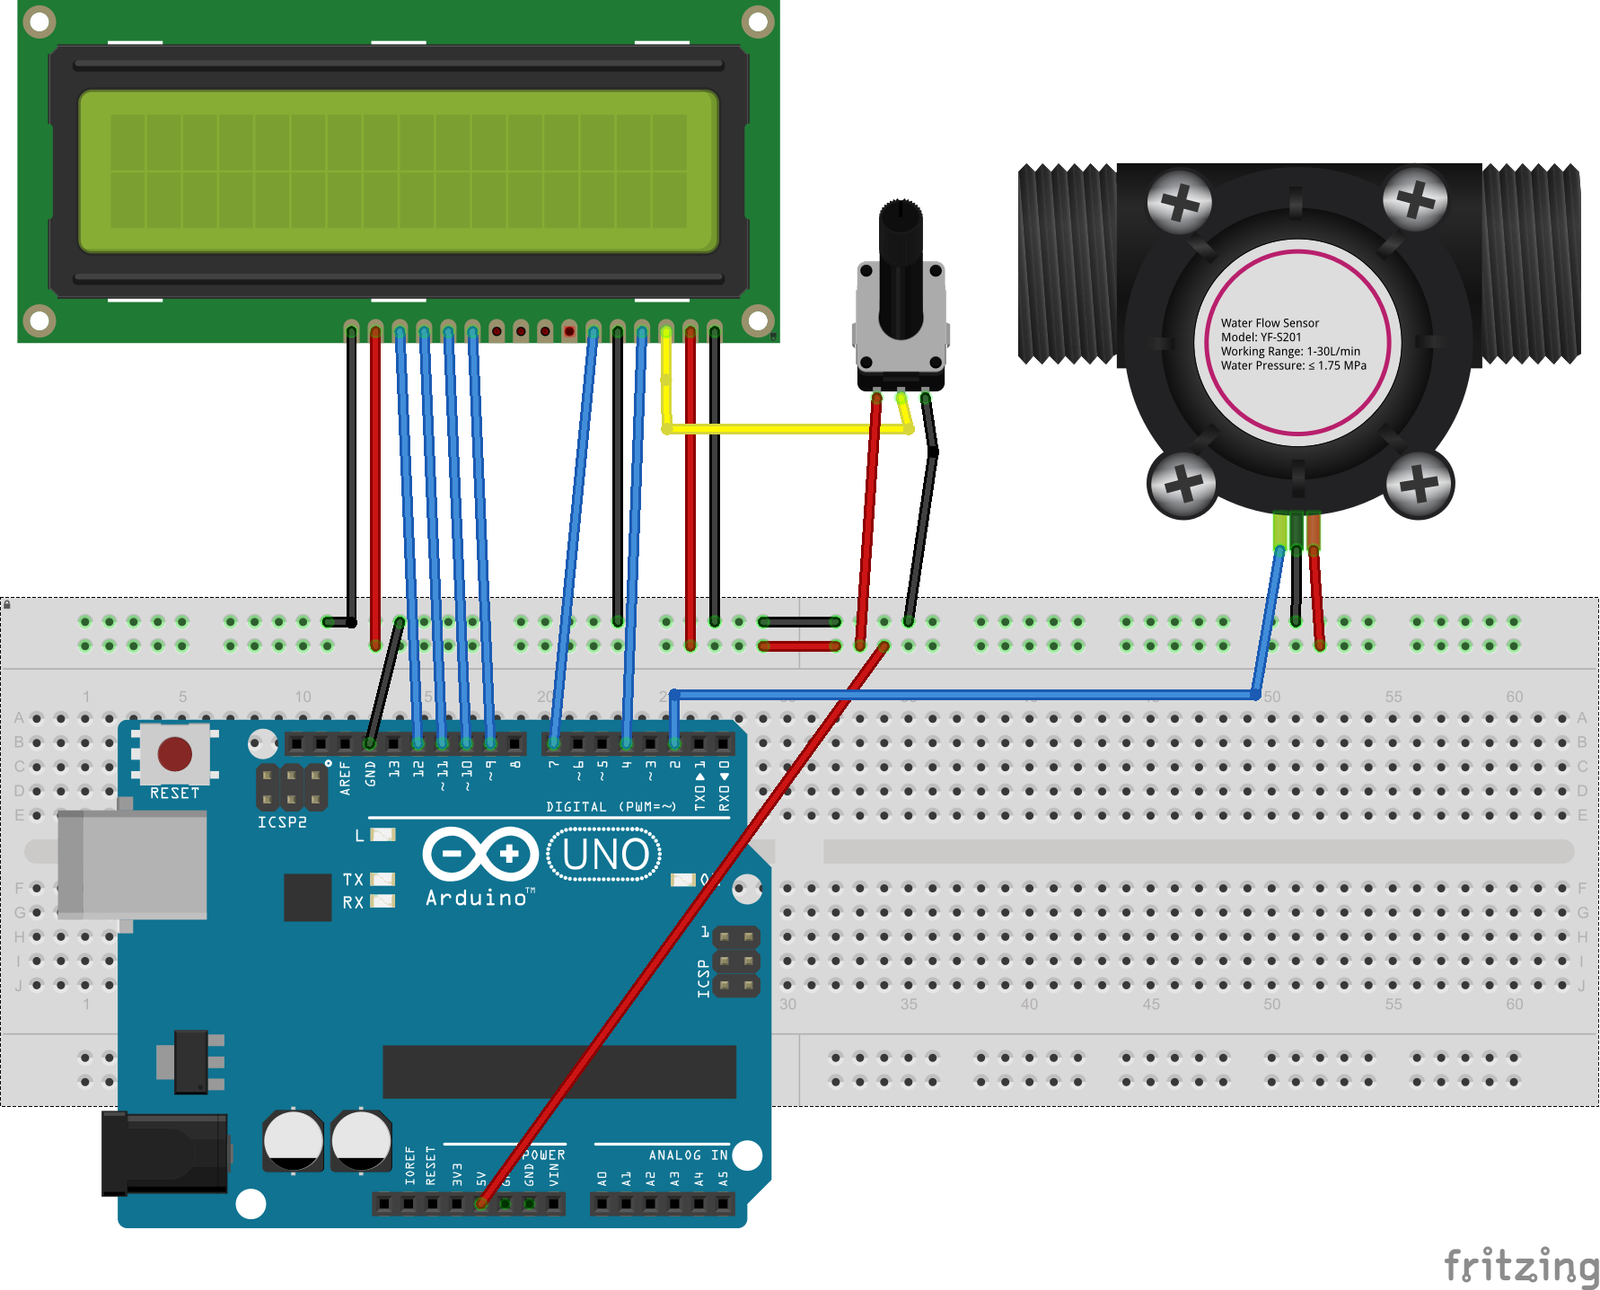 YF-S201 wate flow sensor interfacing with Arduino and LCD connection diagram